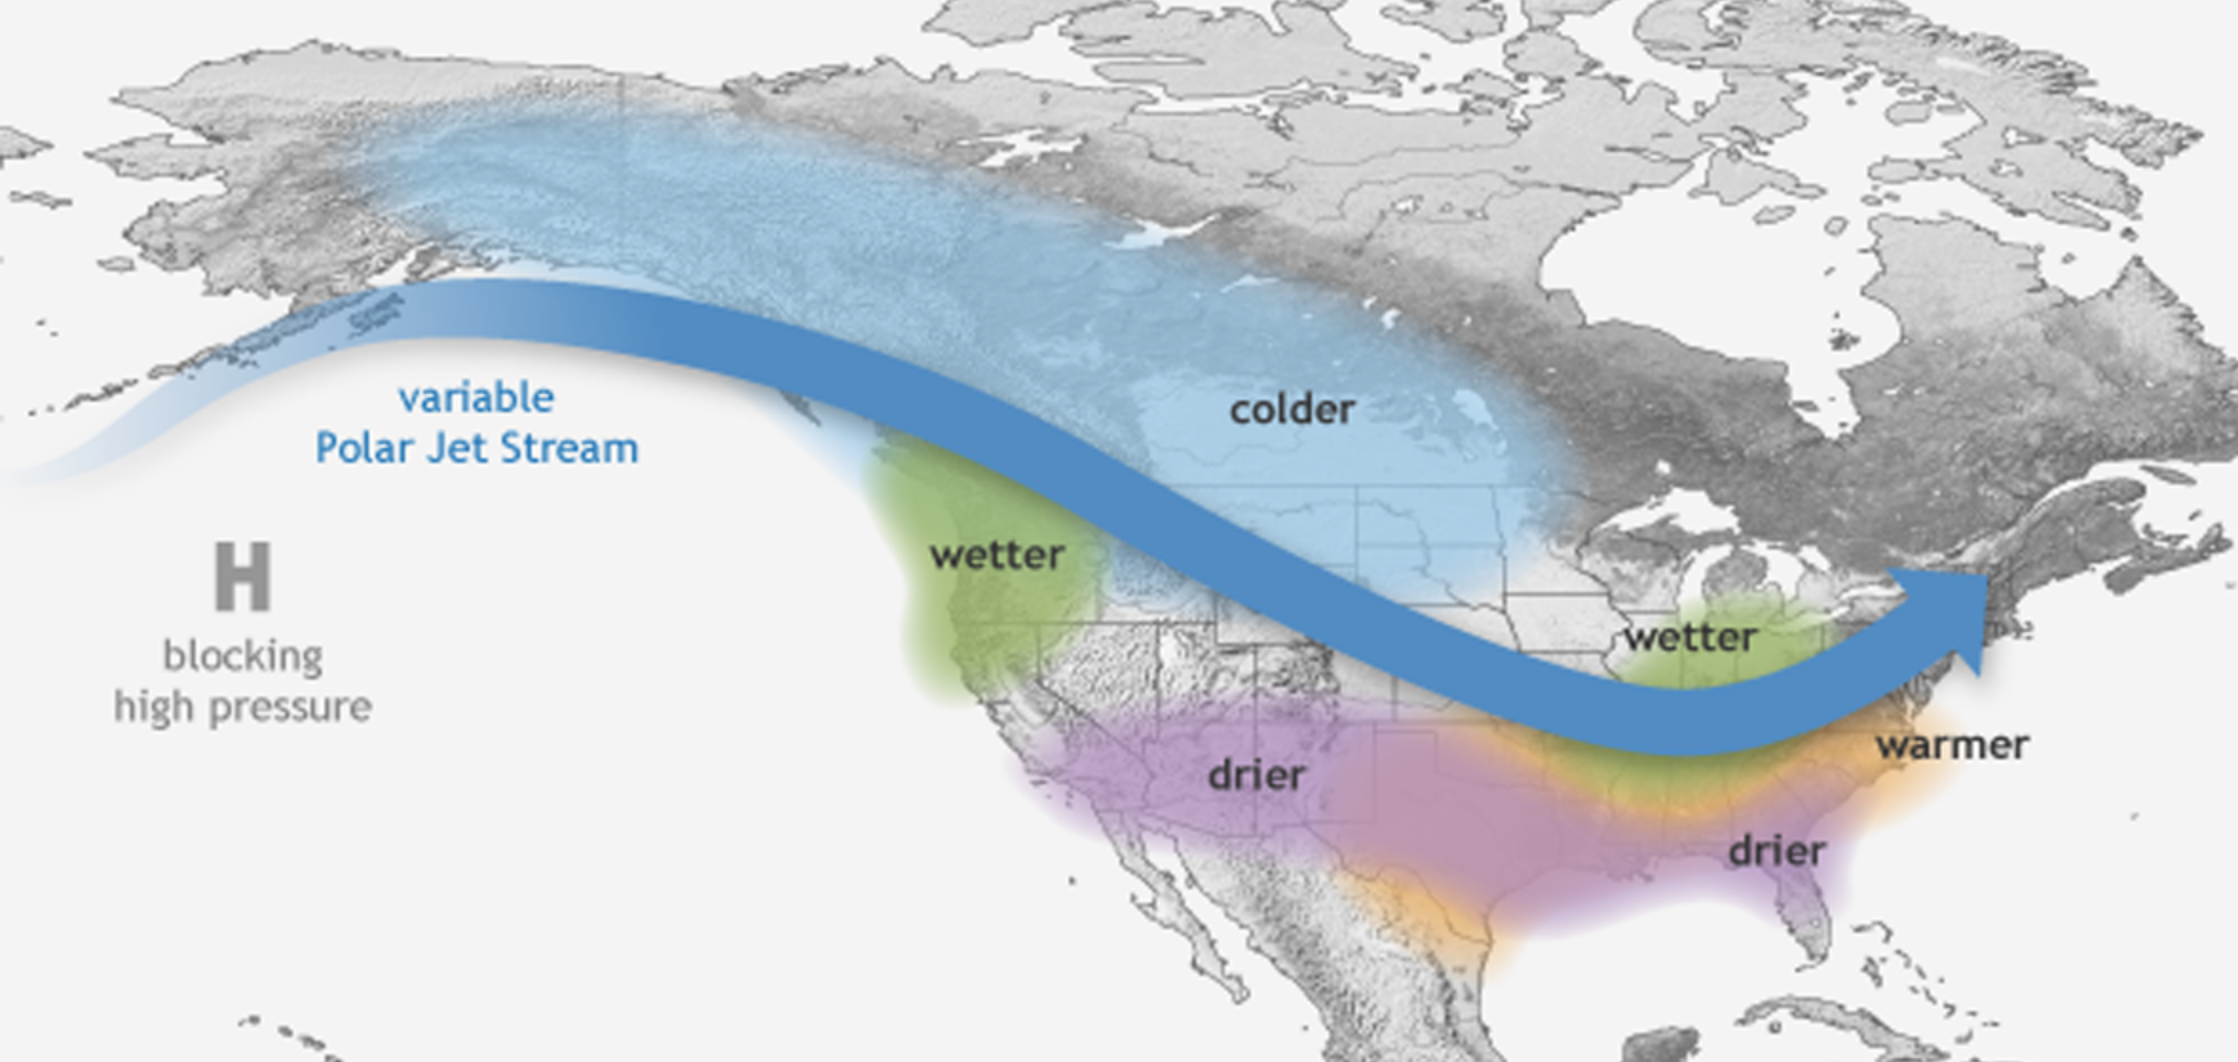 Typical impacts of La Niña on Canada during winter. Credit: Climate.gov